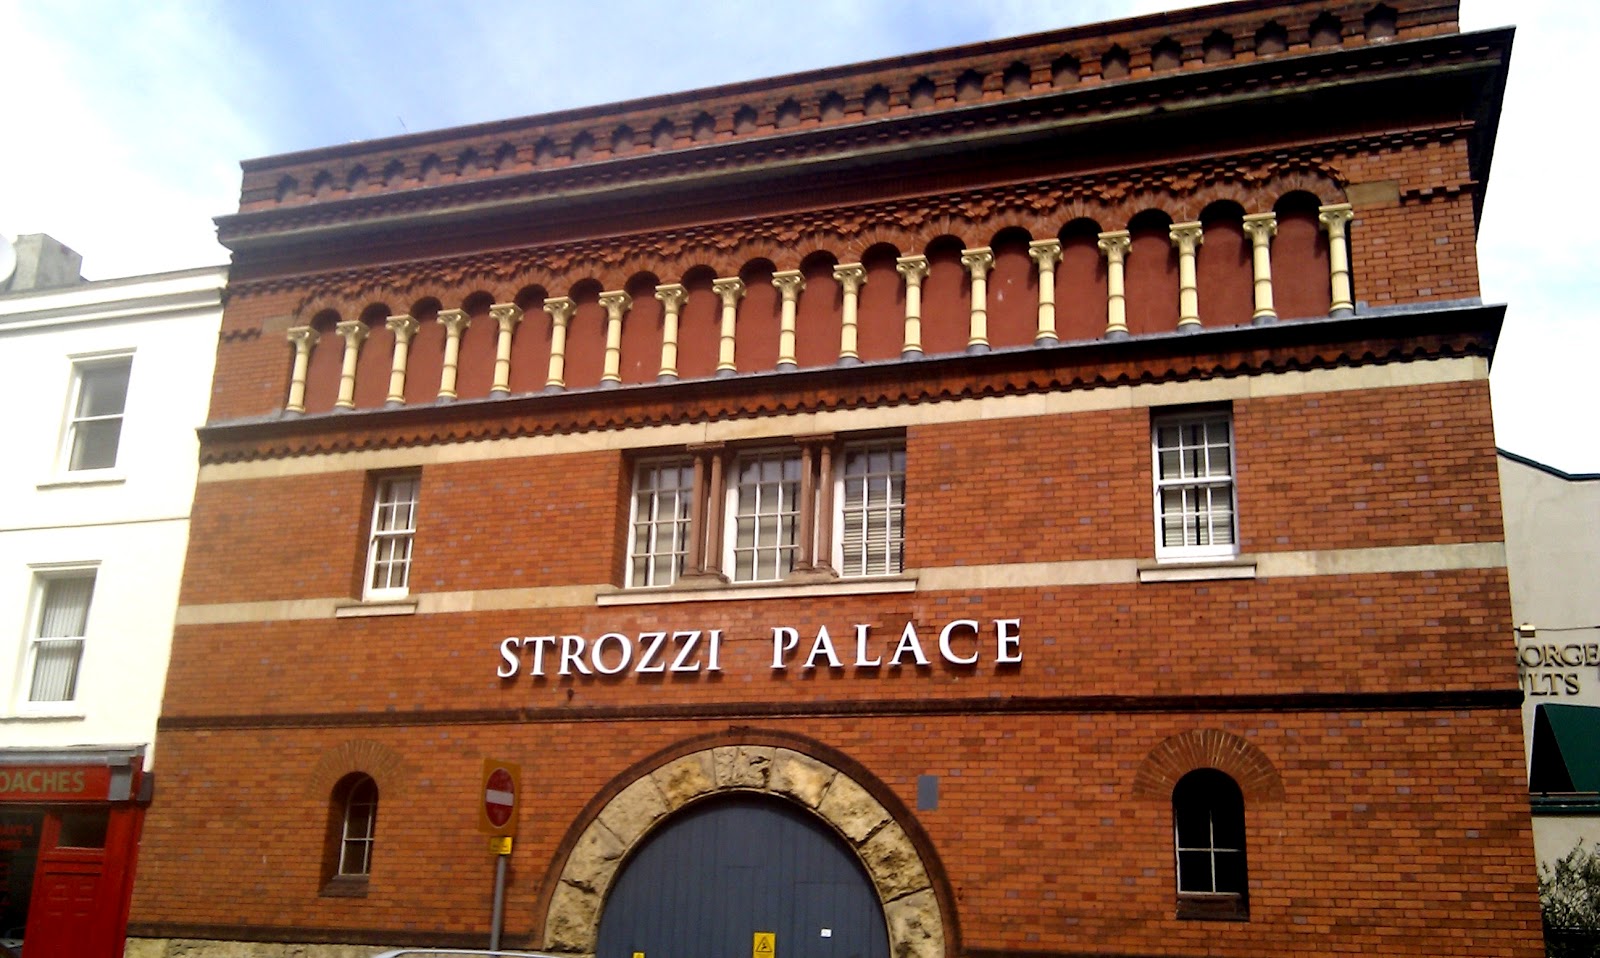 Mansley has acquired Strozzi Palace in the centre of Cheltenham